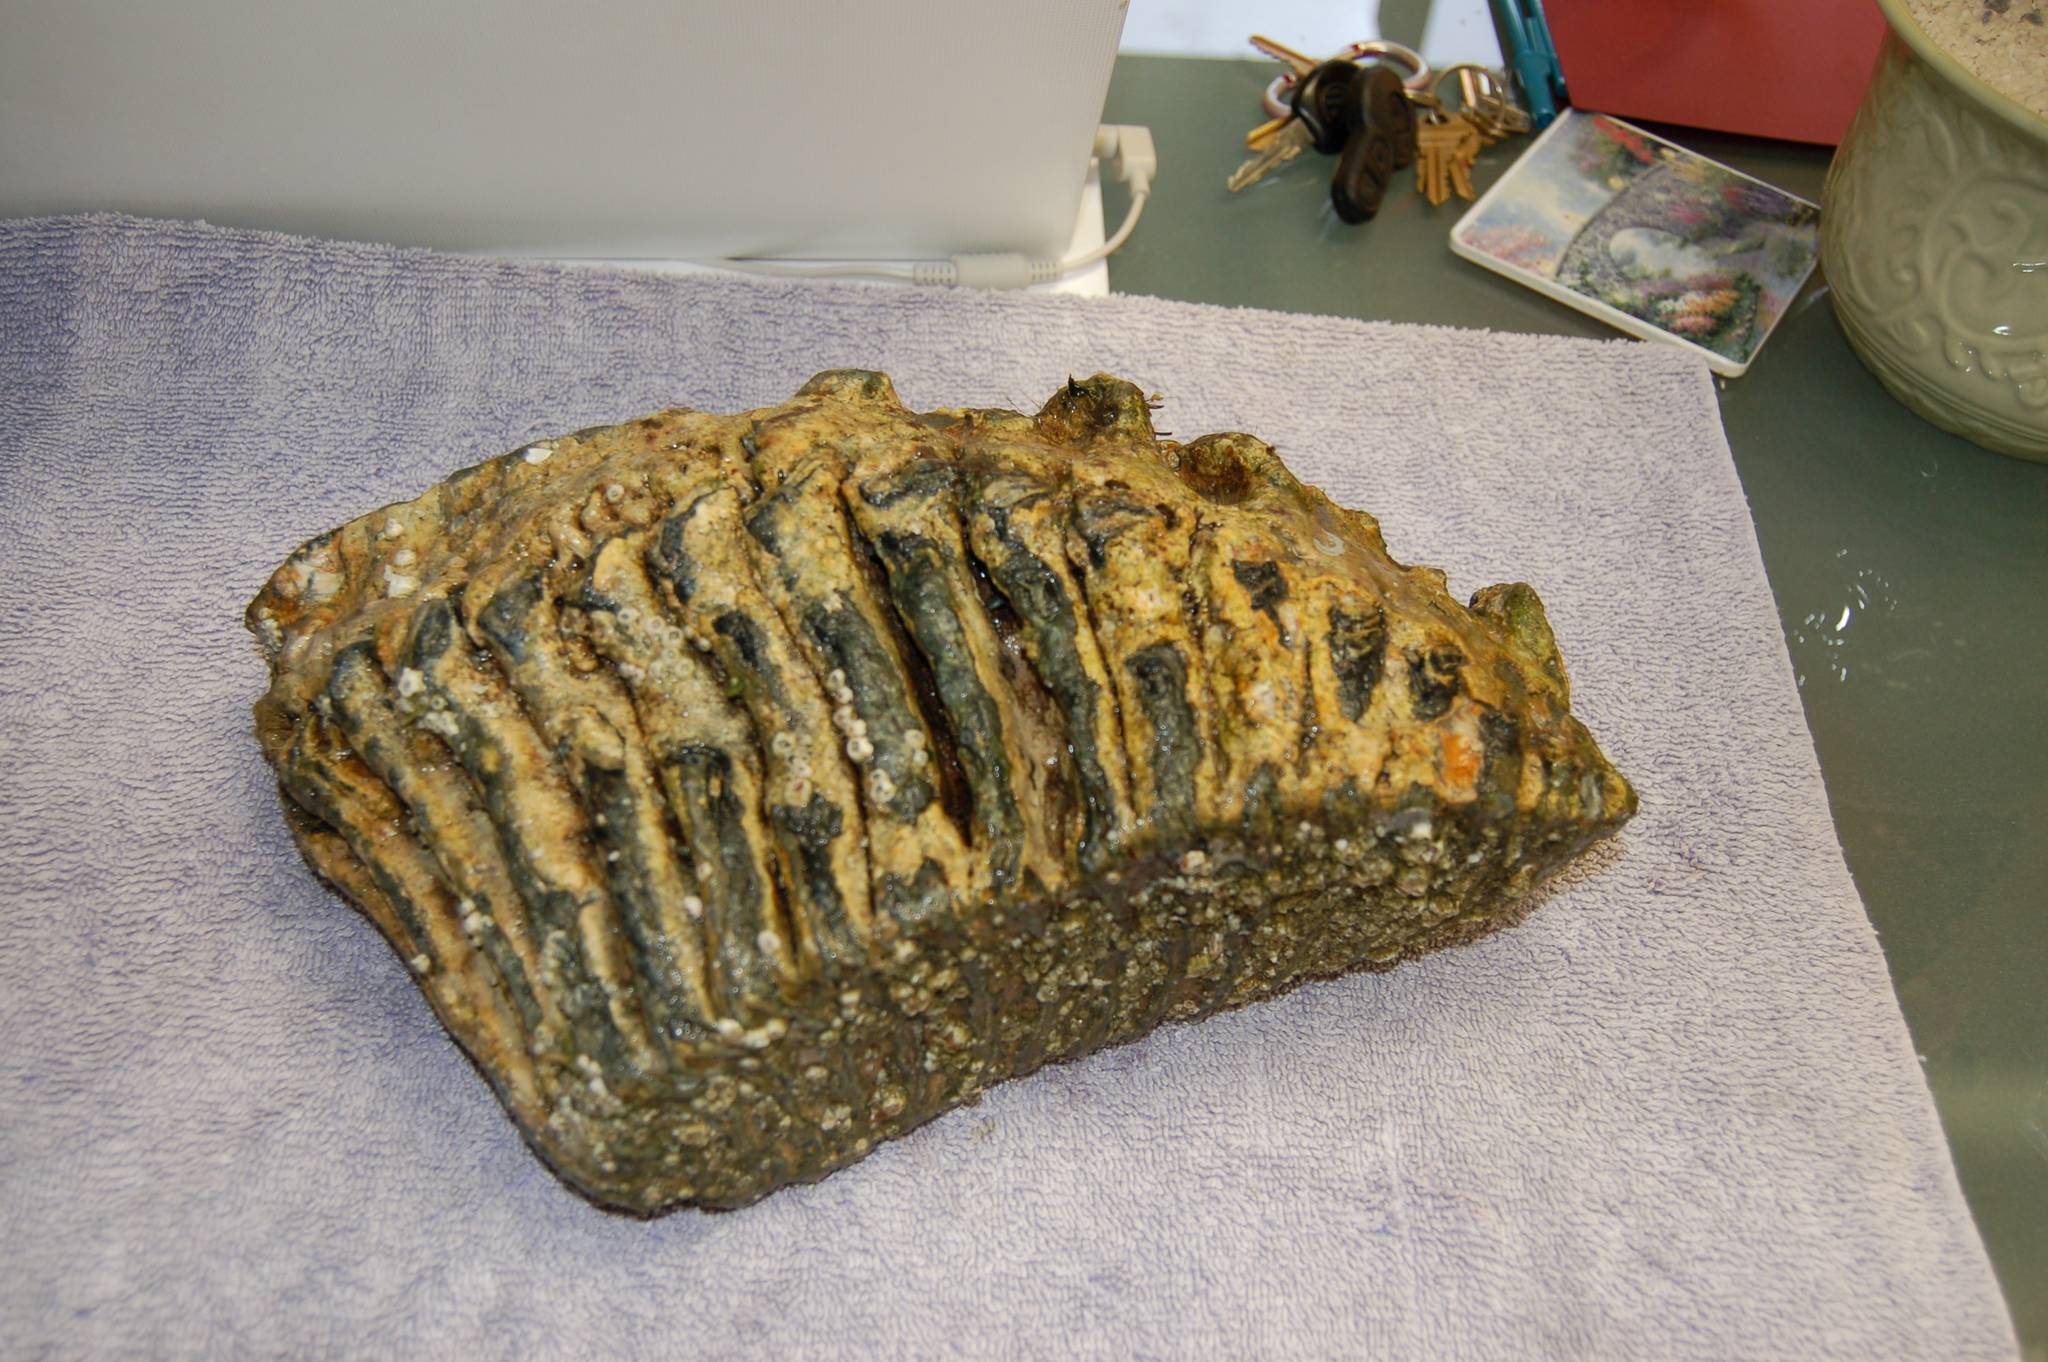 A Columbian mammoth molar estimated to be 19,000-20,000 years old sits on the desk of Sequim resident Lori Christie at her office at JACE Real Estate. She and Dean Flowers found the molar while walking along a public beach in Sequim. (Erin Hawkins/Olympic Peninsula News Group)